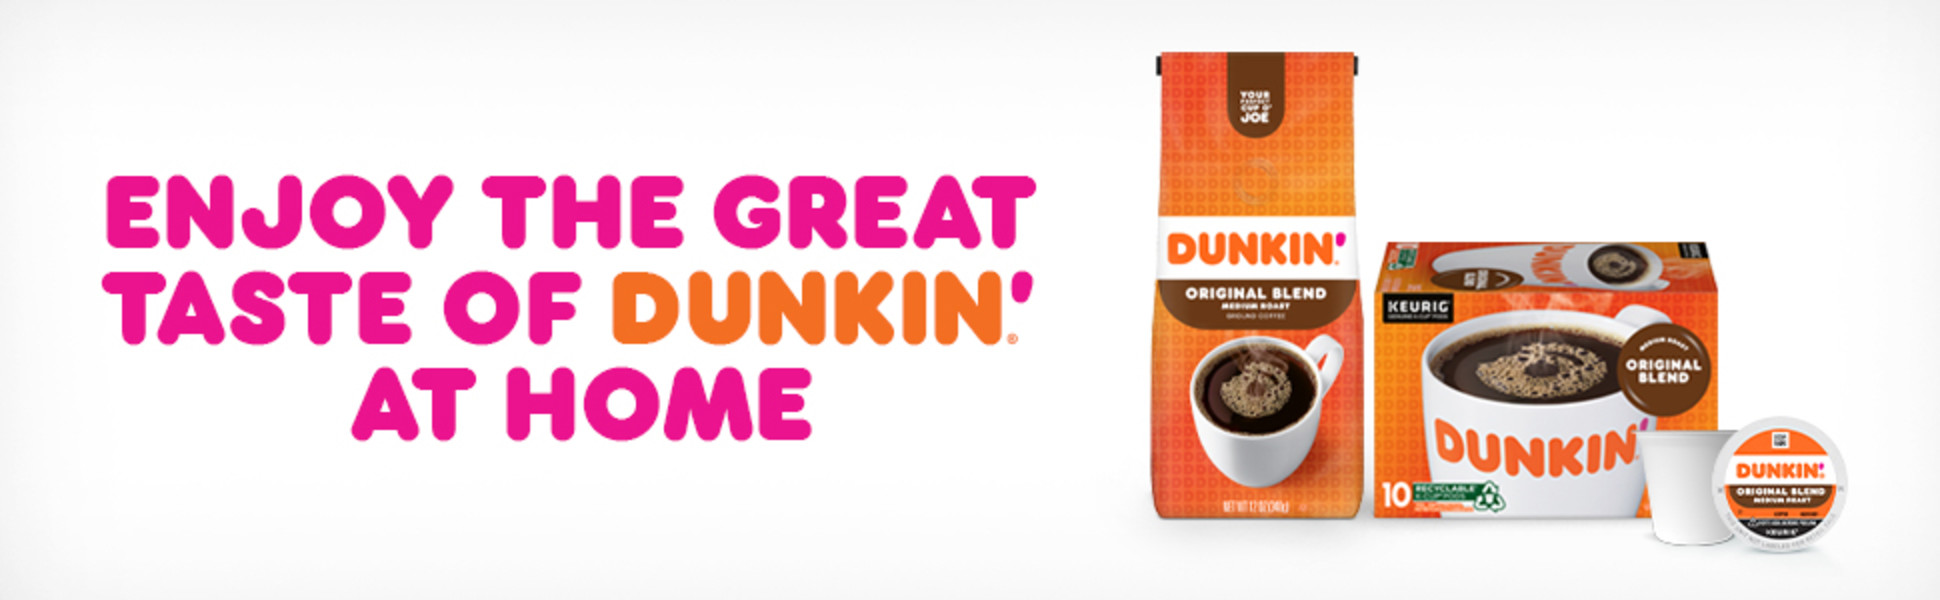 Dunkin' Donuts Original Blend Coffee K-Cup (22-Pack) - Power Townsend  Company